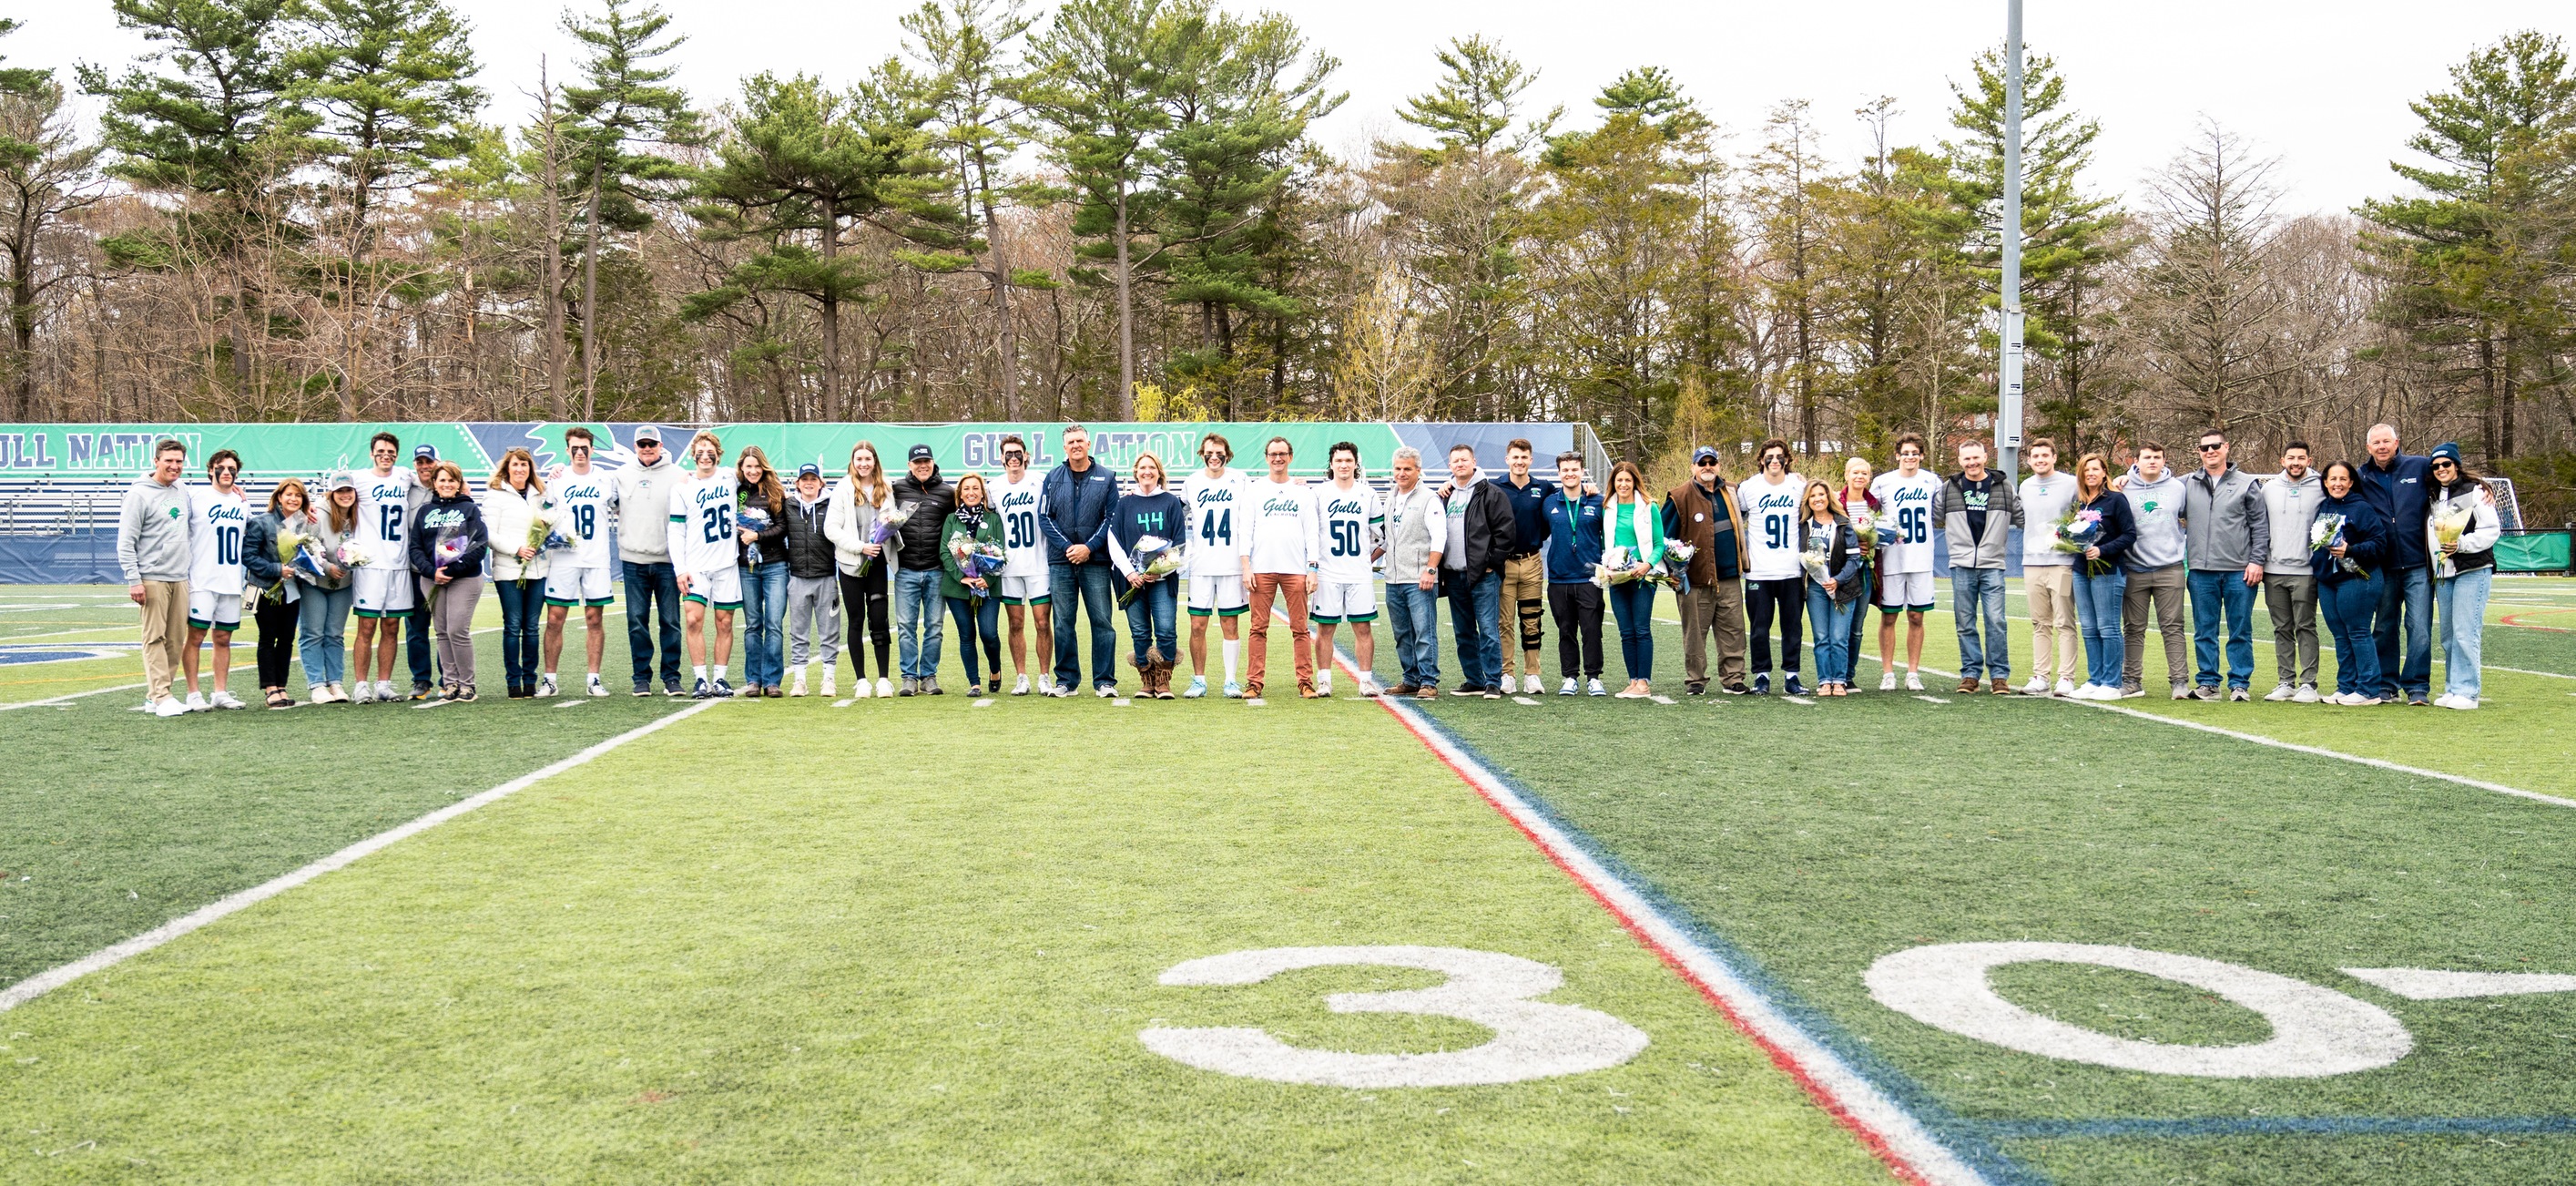 Men’s Lacrosse Routs Western New England On Senior Day, 16-8